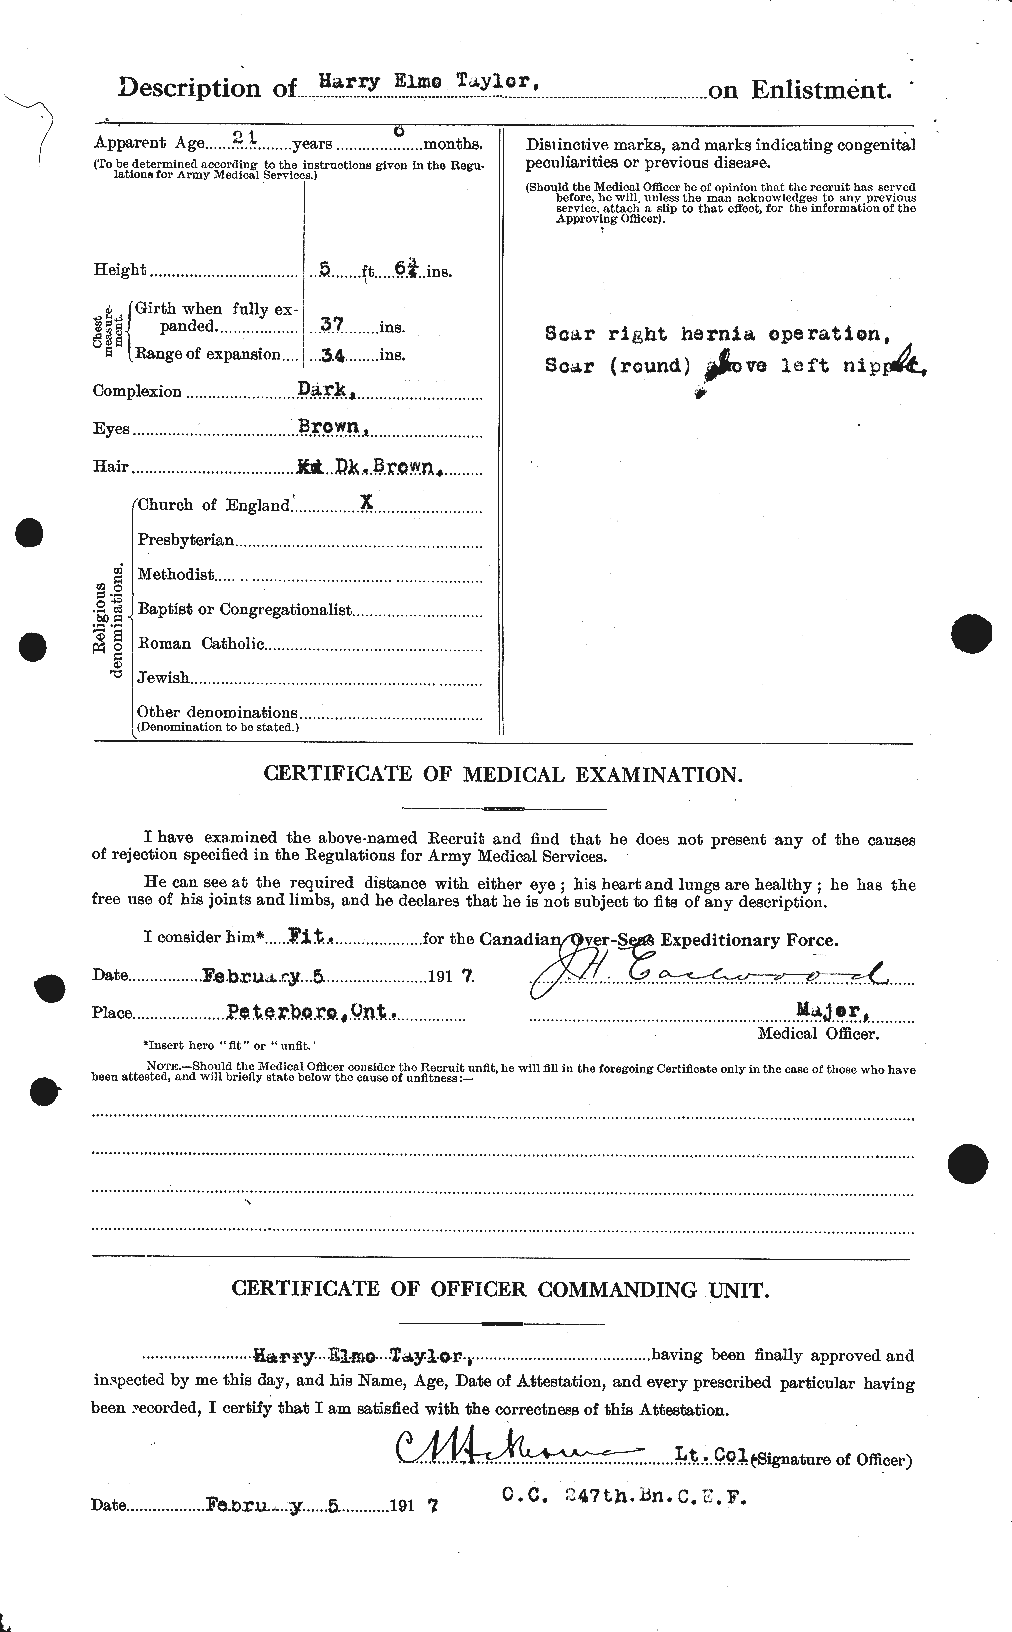 Personnel Records of the First World War - CEF 626493b